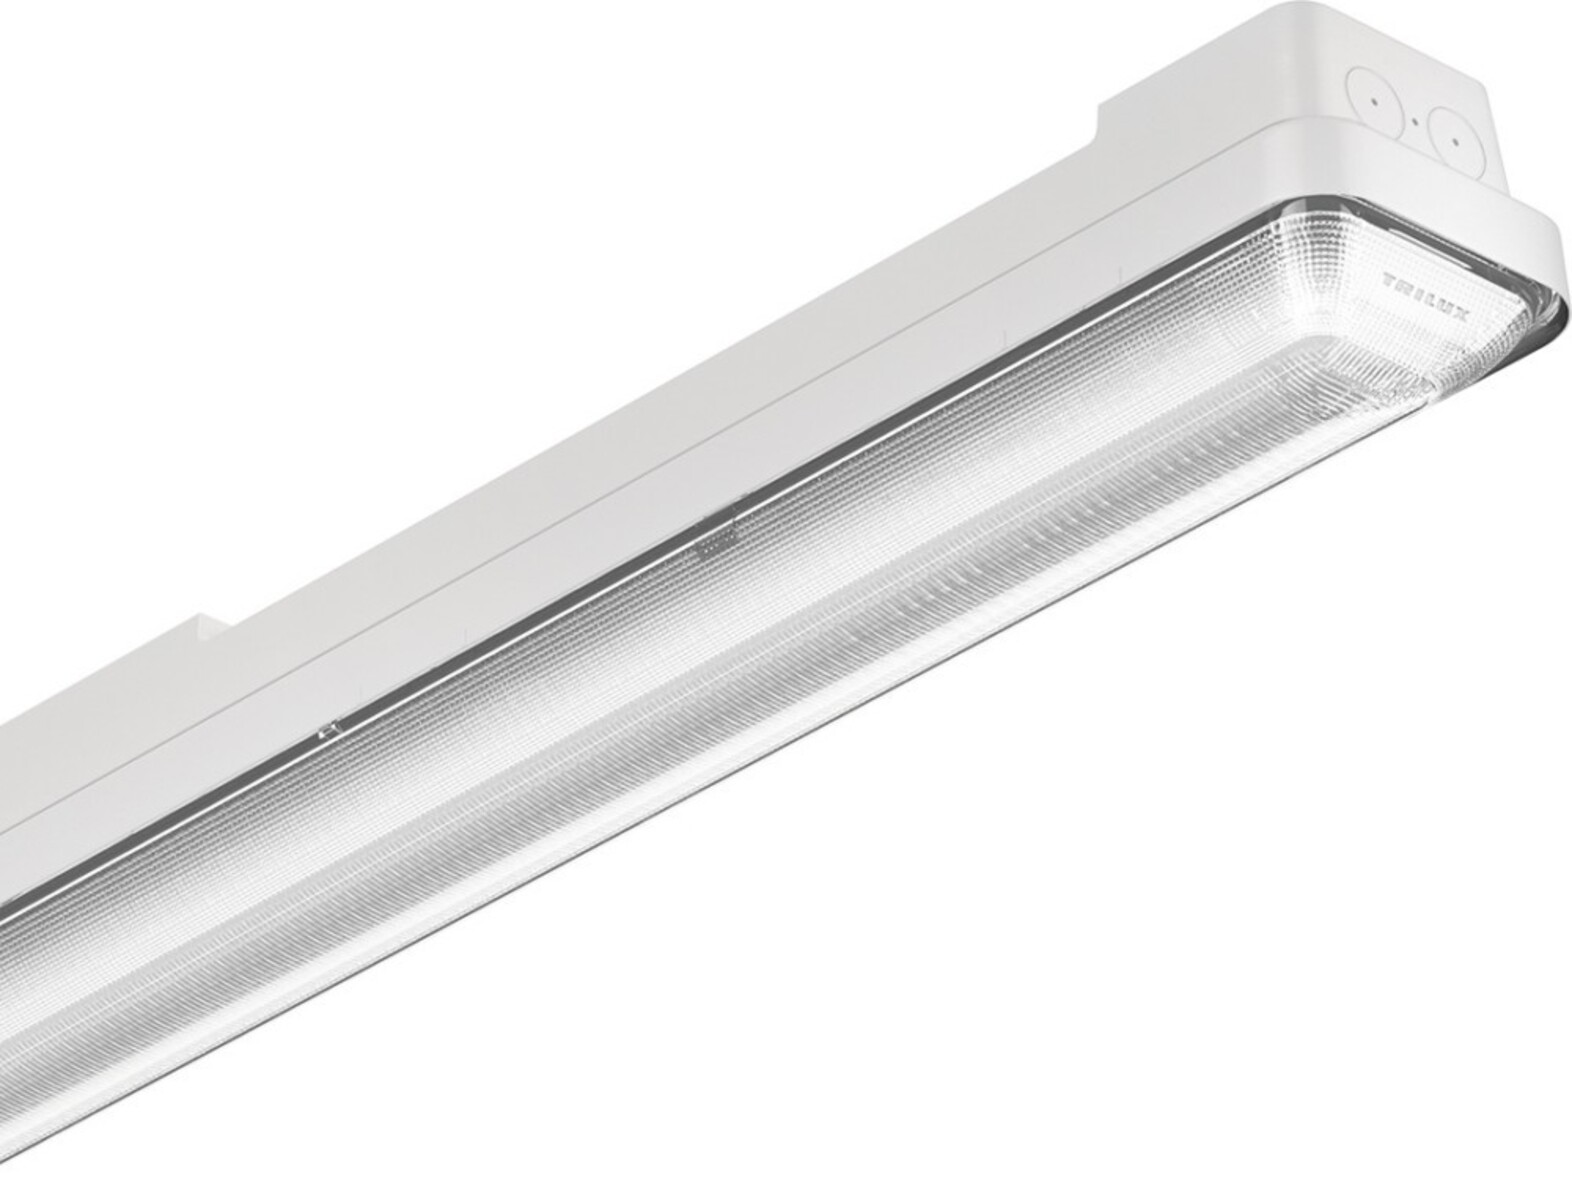 2310 Trilux 7922740 12 B40 LED-Feuchtraumleuchte